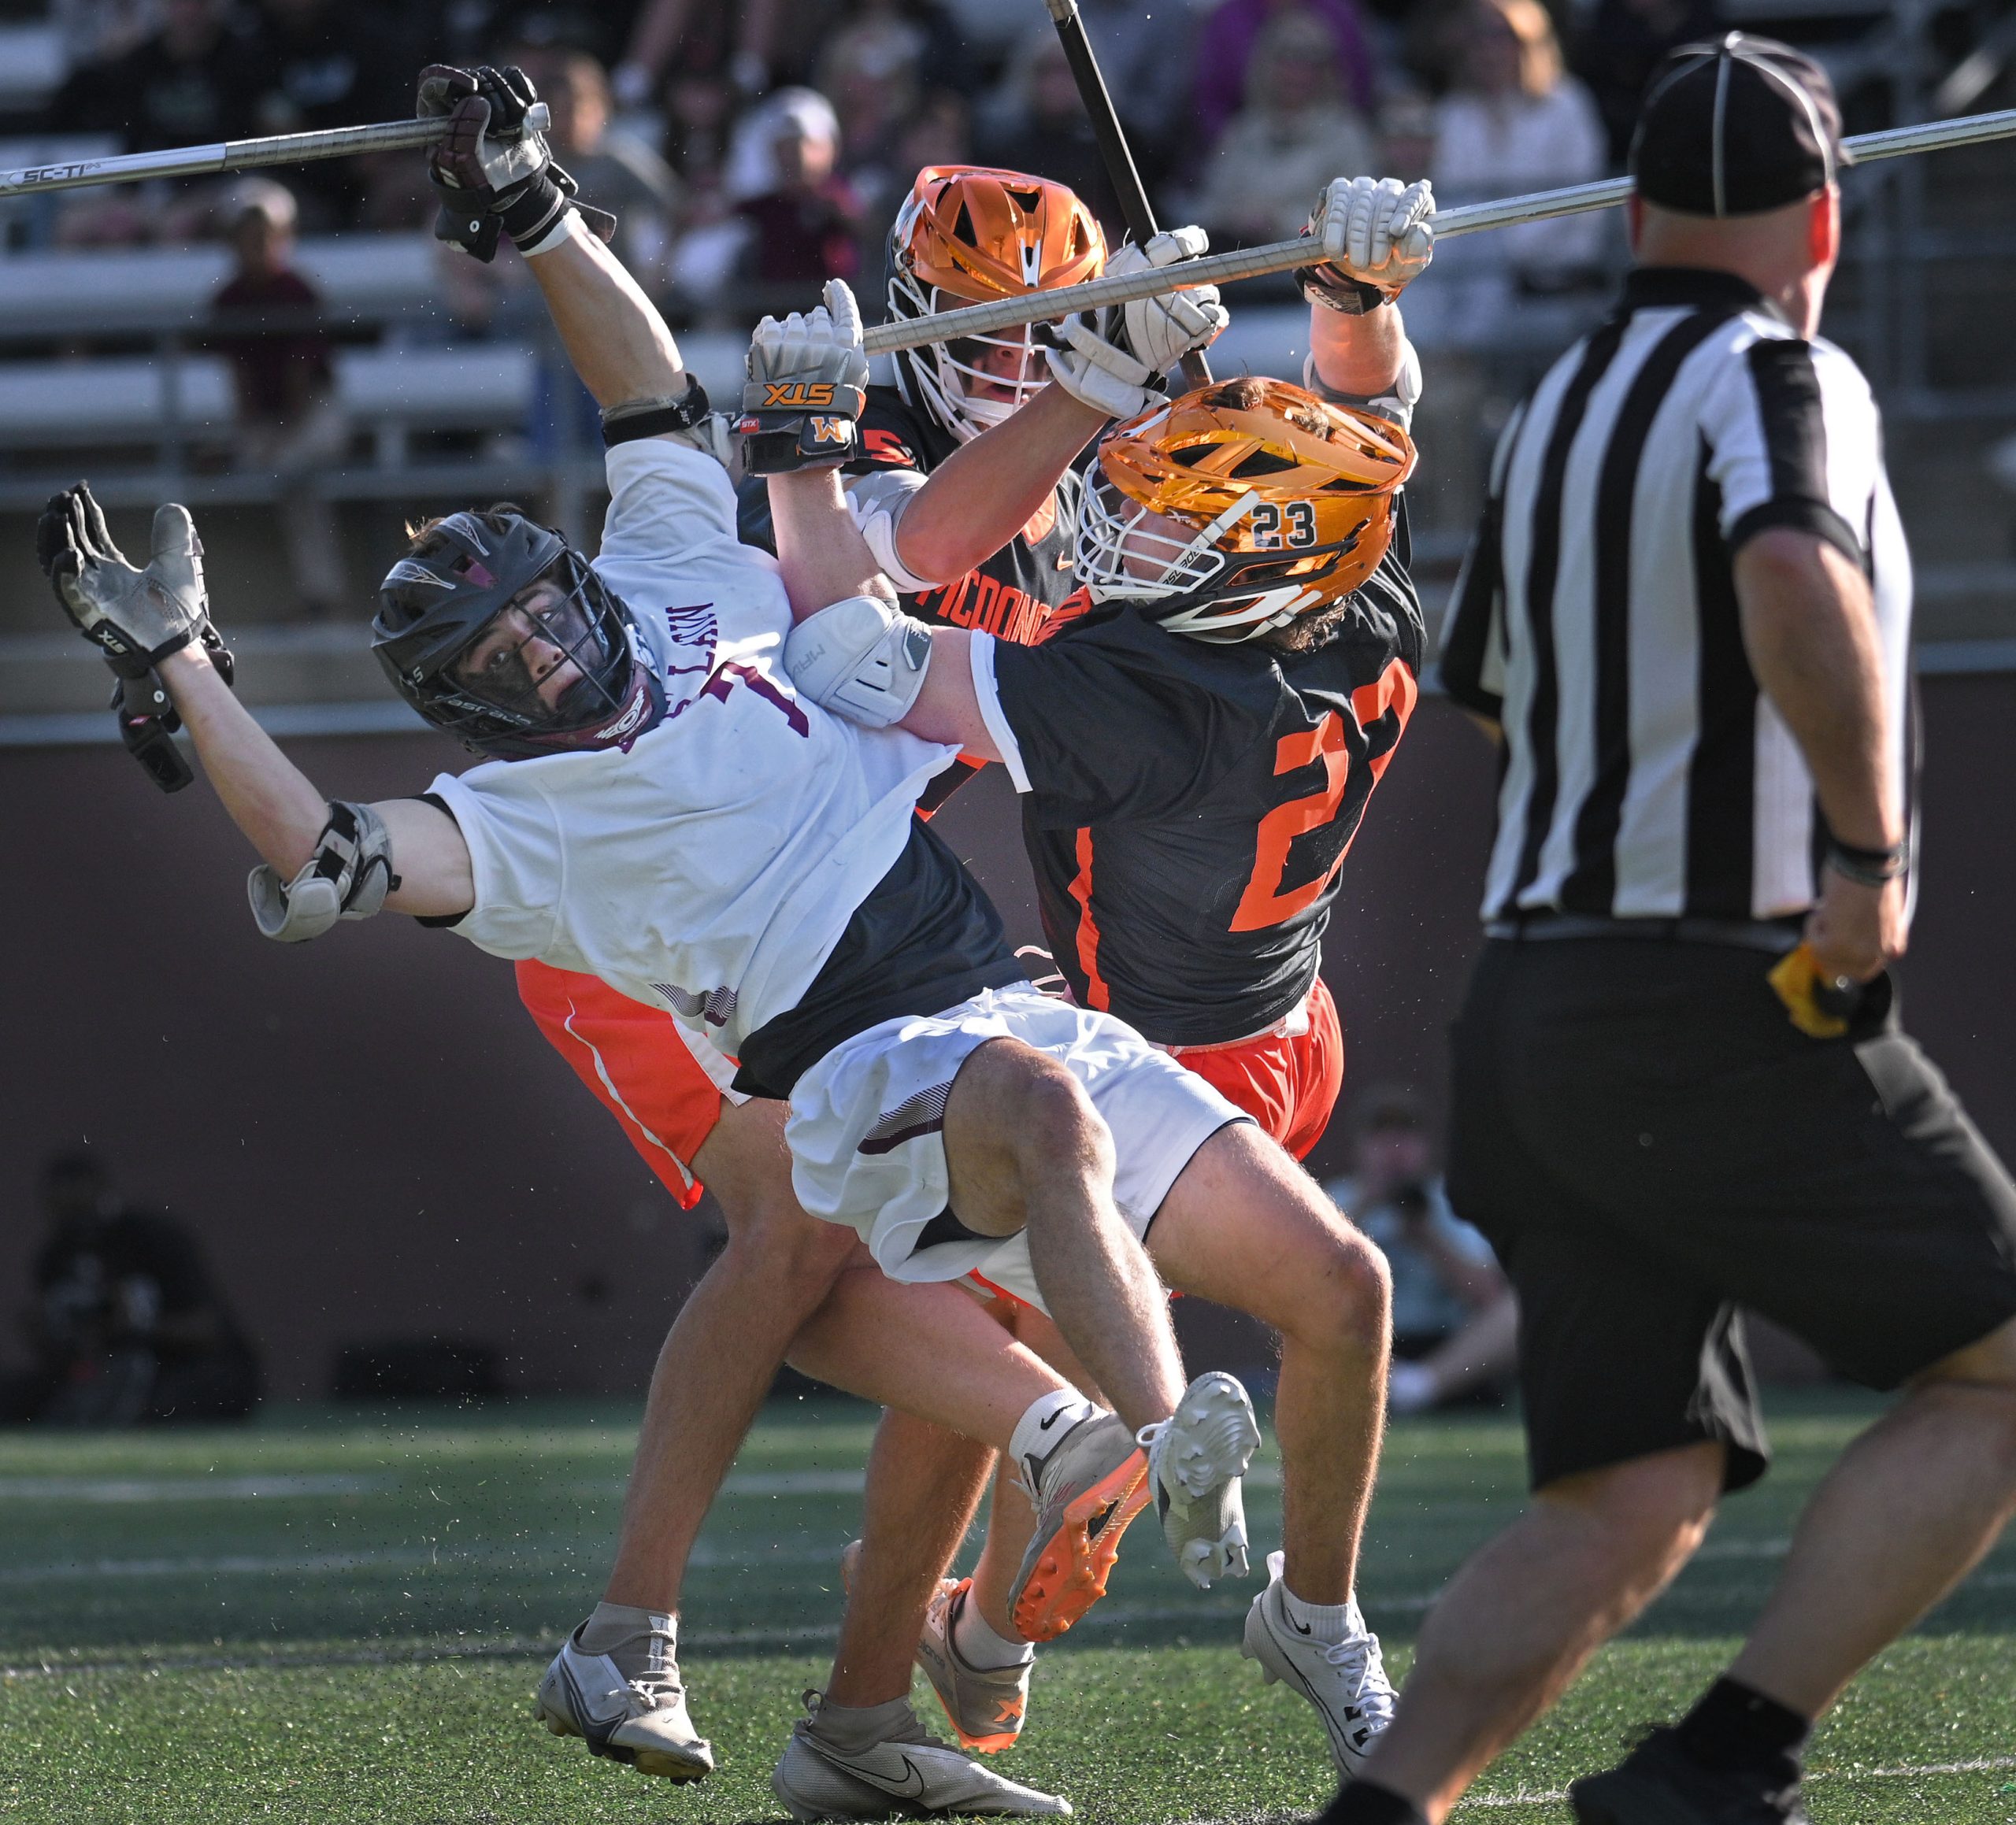 McDonogh’s Liam Whittle, center, makes an illegal cross check on...